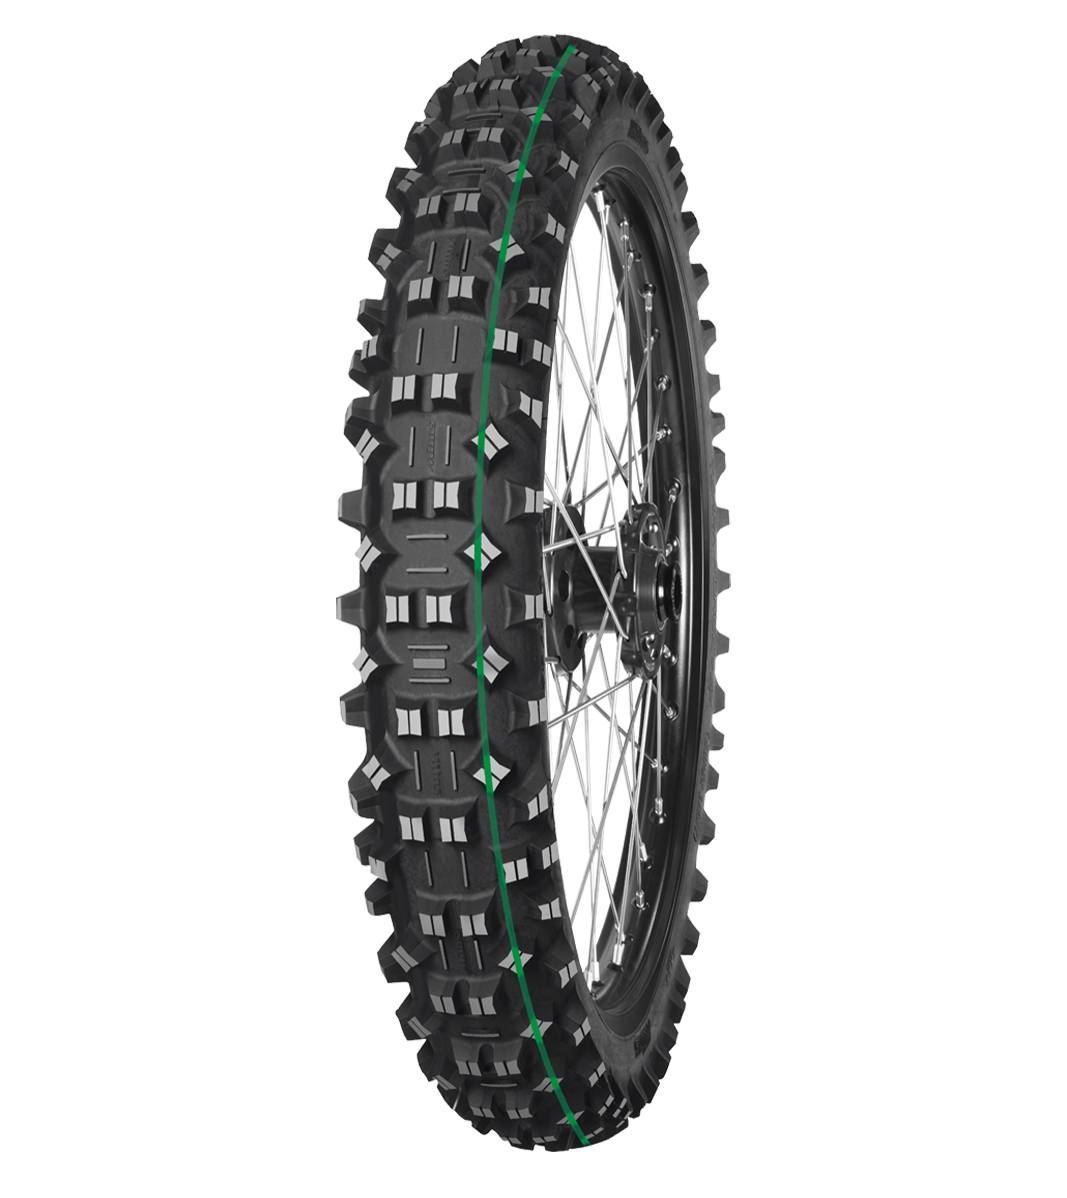 Mitas TERRA FORCE-EF 90/90-21 Enduro Competition Off-Road SUPER LIGHT 54R Green Tube Front Tire, 226748, 90/90-21, Enduro Competition, Front, Off-Road, Terra Force, Terra Force-EF, Trail, Tires - Imported and distributed in North &amp; South America by Lindeco Genuine Powersports - Premier Powersports Equipment and Accessories for Motorcycle Enthusiasts, Professional Riders and Dealers.